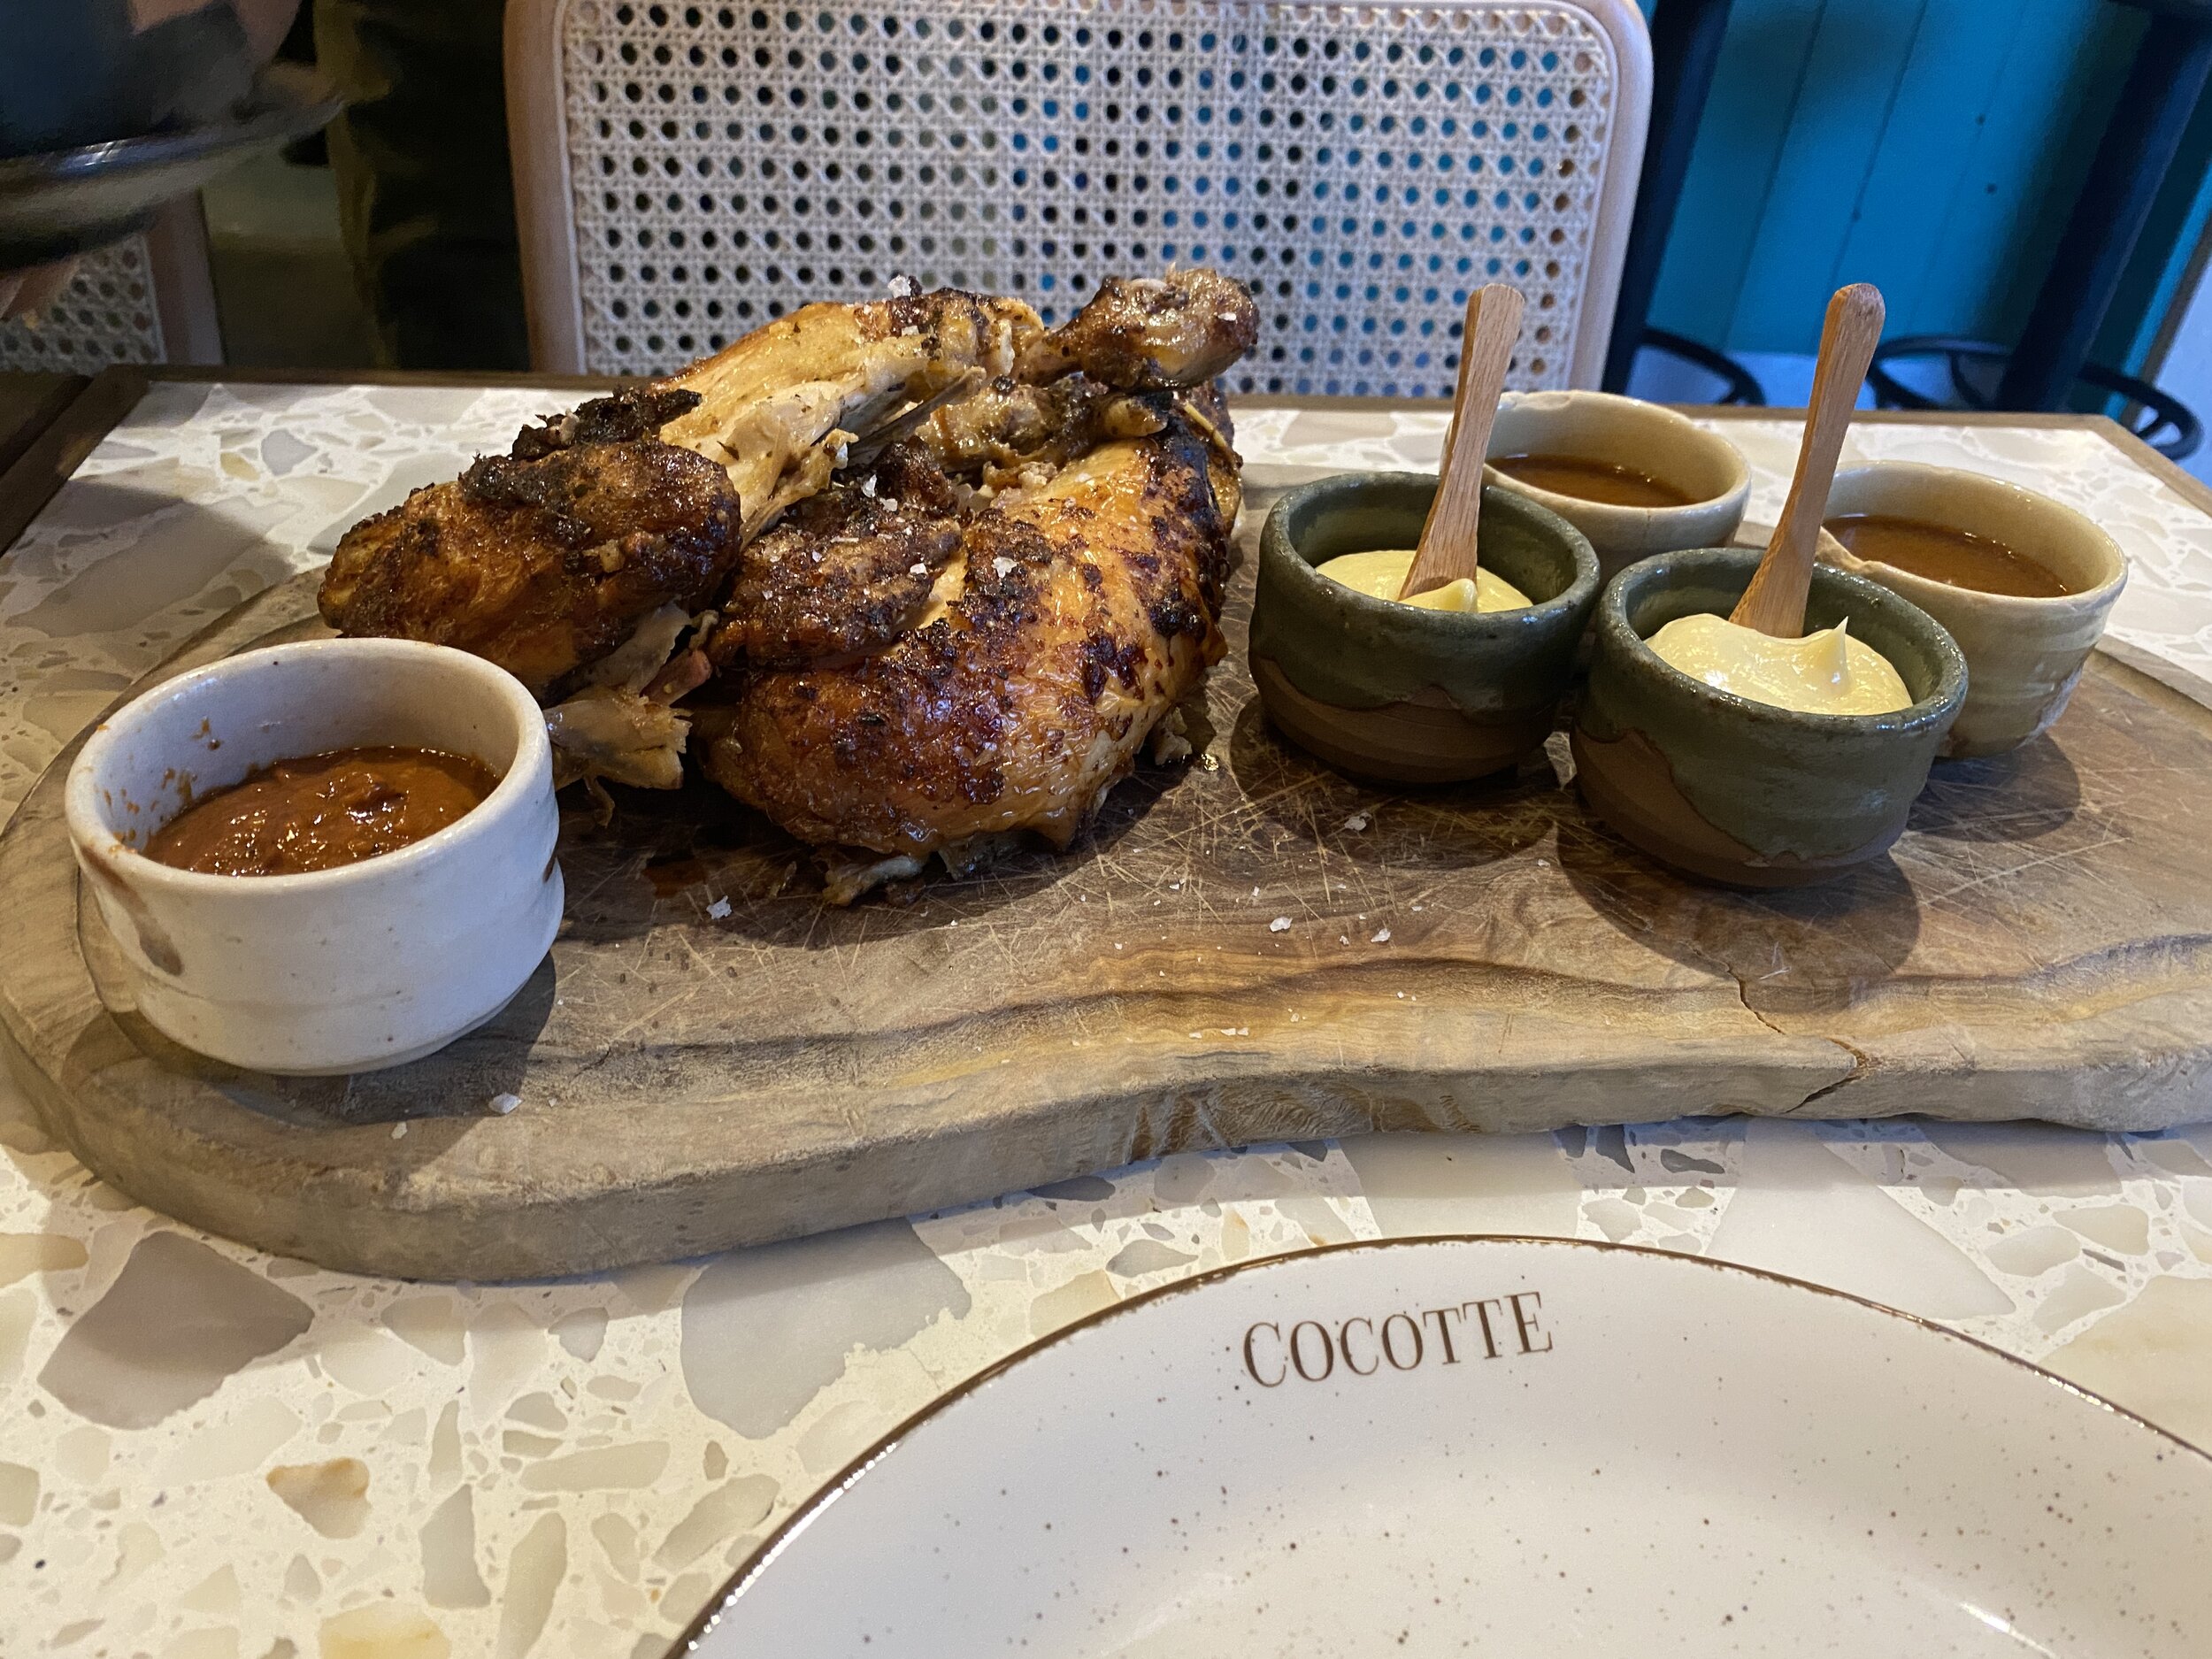 Good News Letter - Good Guide To Notting Hill - Cocotte - Restaurant Review - Best Roast - Farm to Table _7624.JPEG